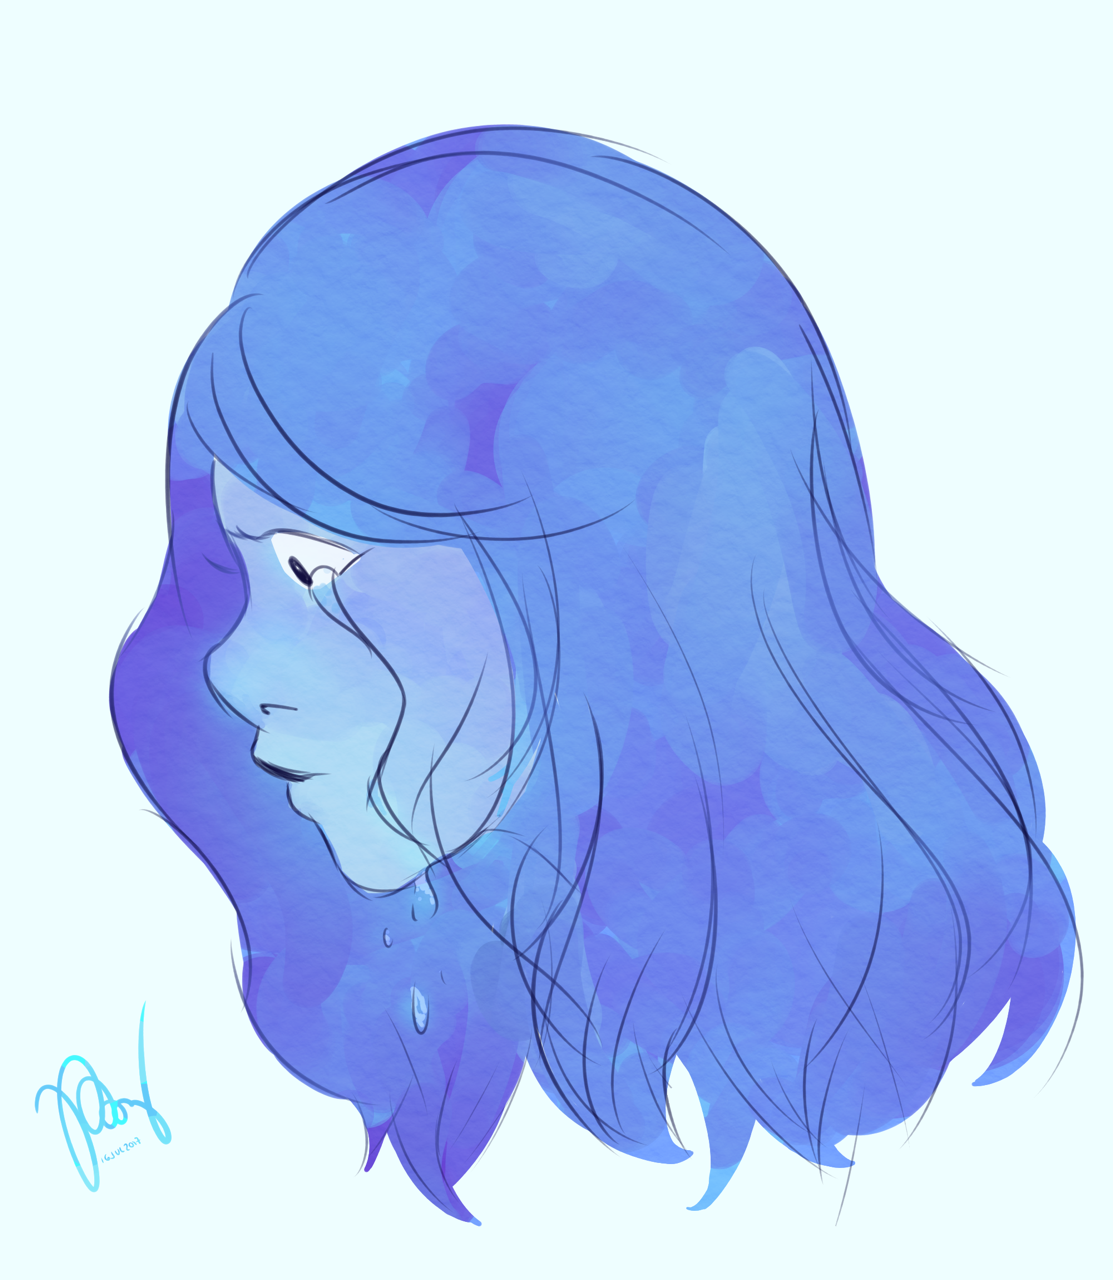 im still trying to figure out my style, so drawing one of my favorite characters from steven universe, lapis, was a lot of fun to experiment!